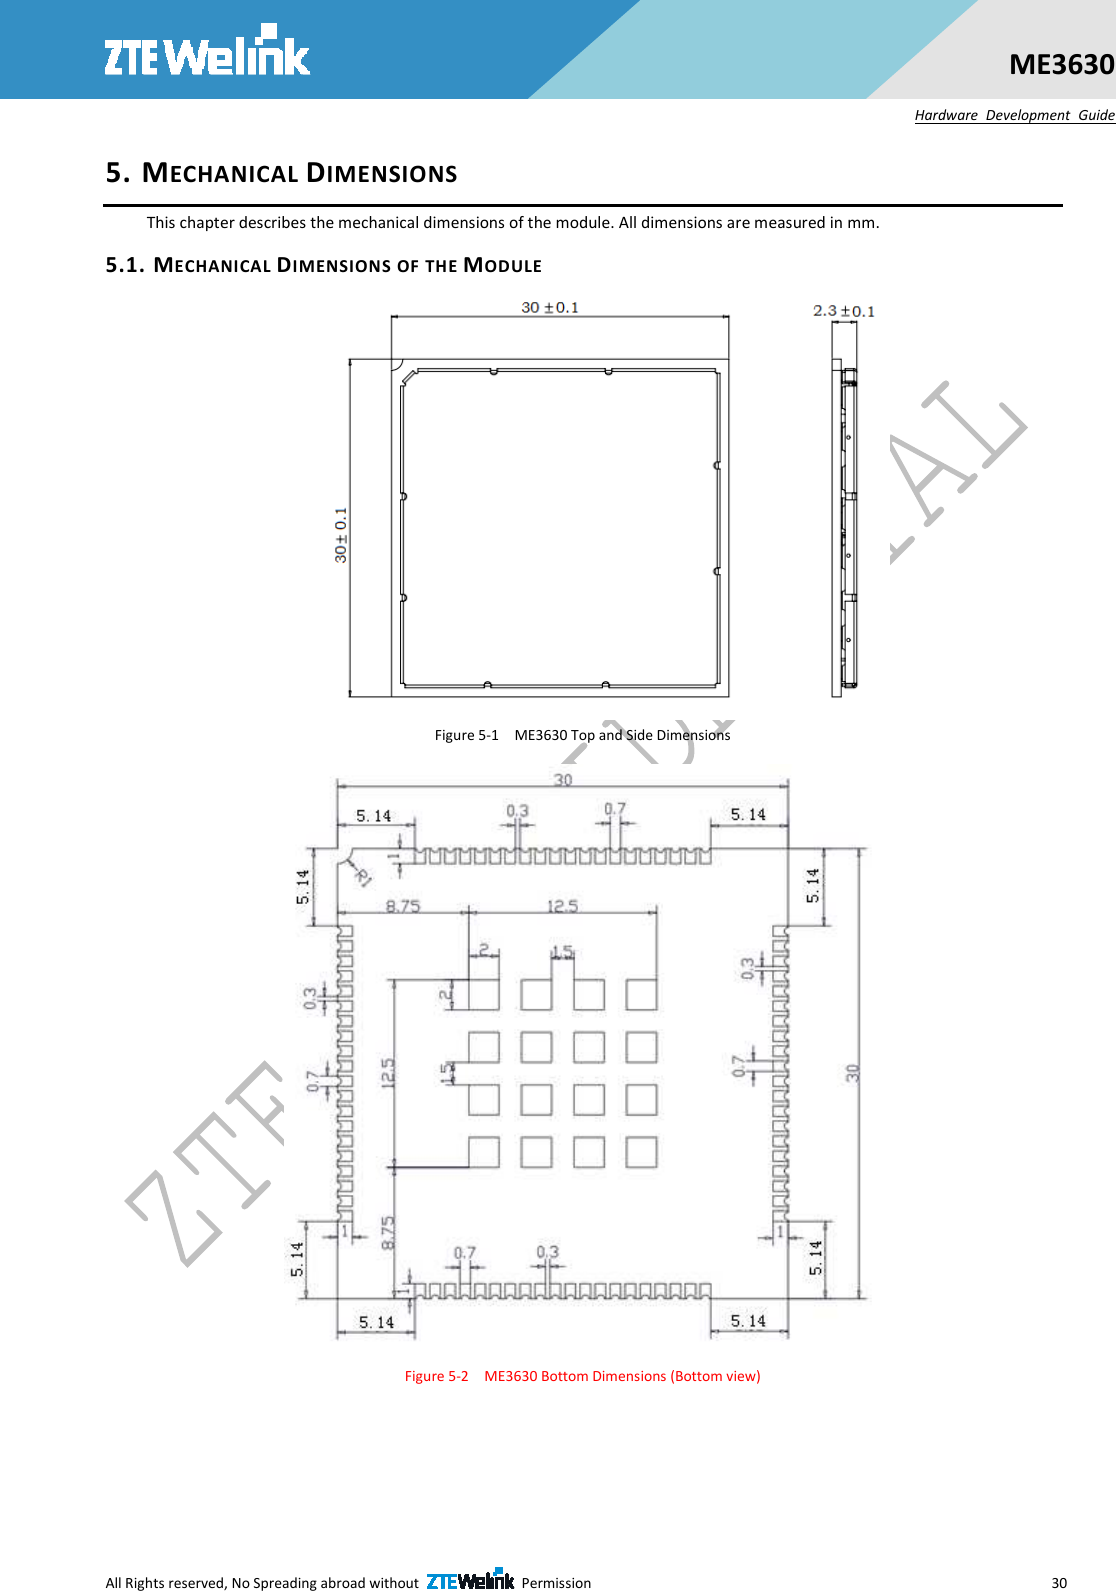  All Rights reserved, No Spreading abroad without    Permission      30 ME3630 Hardware  Development  Guide 5. MECHANICAL DIMENSIONS This chapter describes the mechanical dimensions of the module. All dimensions are measured in mm. 5.1. MECHANICAL DIMENSIONS OF THE MODULE  Figure 5-1    ME3630 Top and Side Dimensions  Figure 5-2    ME3630 Bottom Dimensions (Bottom view)  